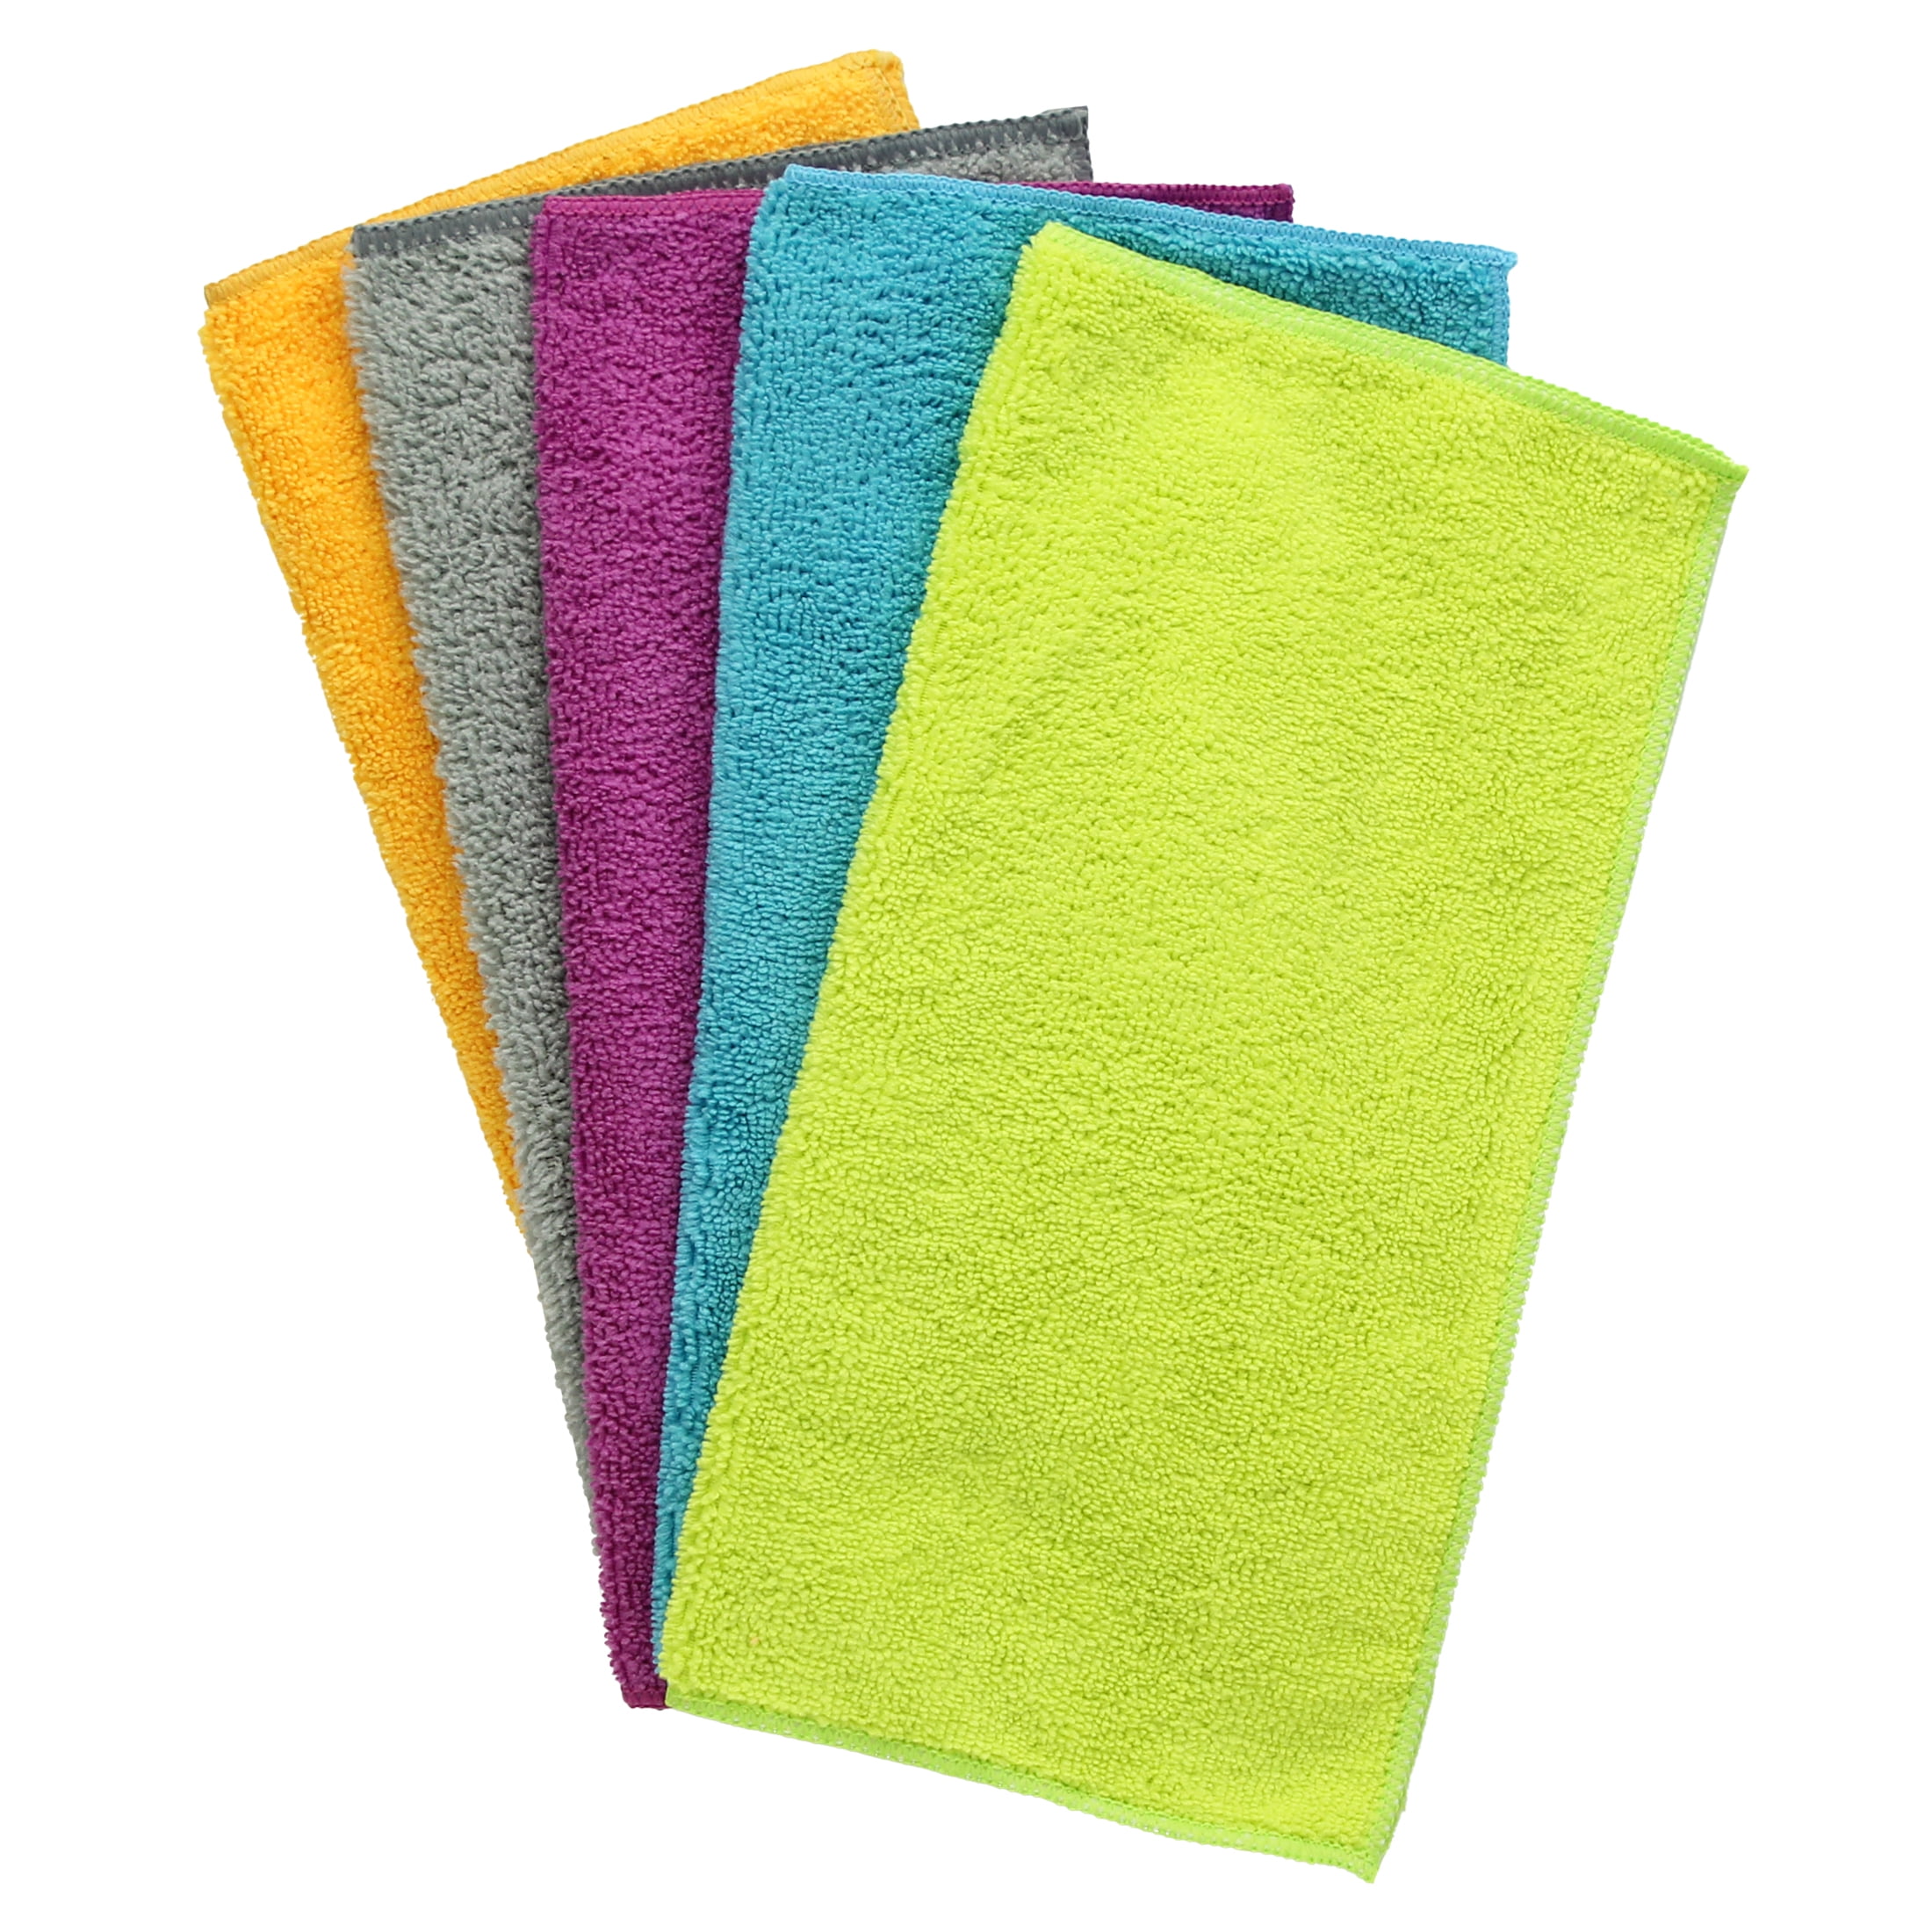 Masthome Microfiber Cleaning Cloths, Pack of 60, 12.6 x 12.6 inch, Reusable  and Washable, High Absorbent Kithchen Towels, Lint-Free Cleaning Rags for